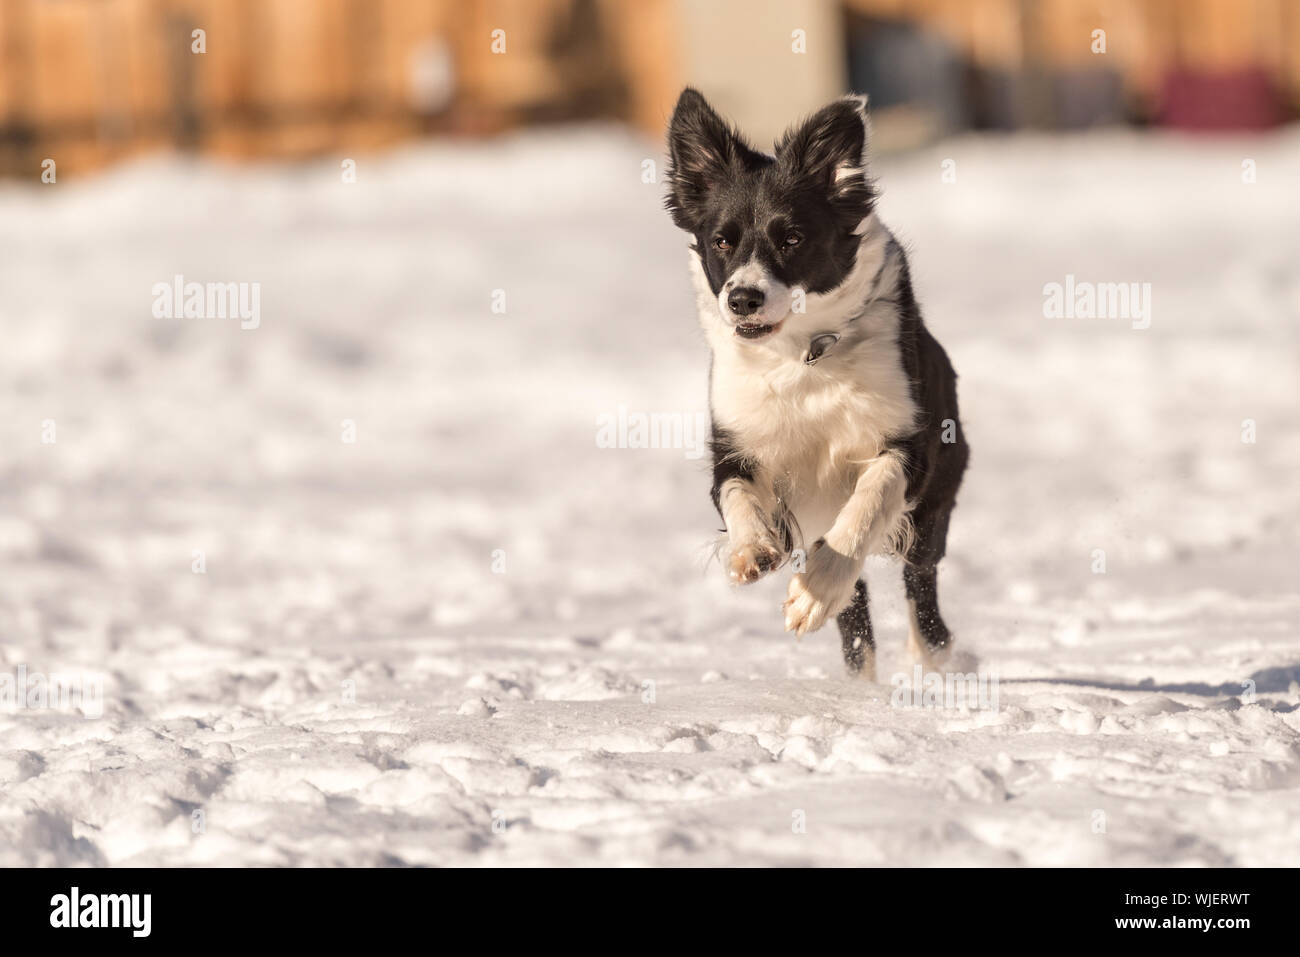 Young Cute Border collie dog in snowy winter. Dog running and having fun in the snow Stock Photo